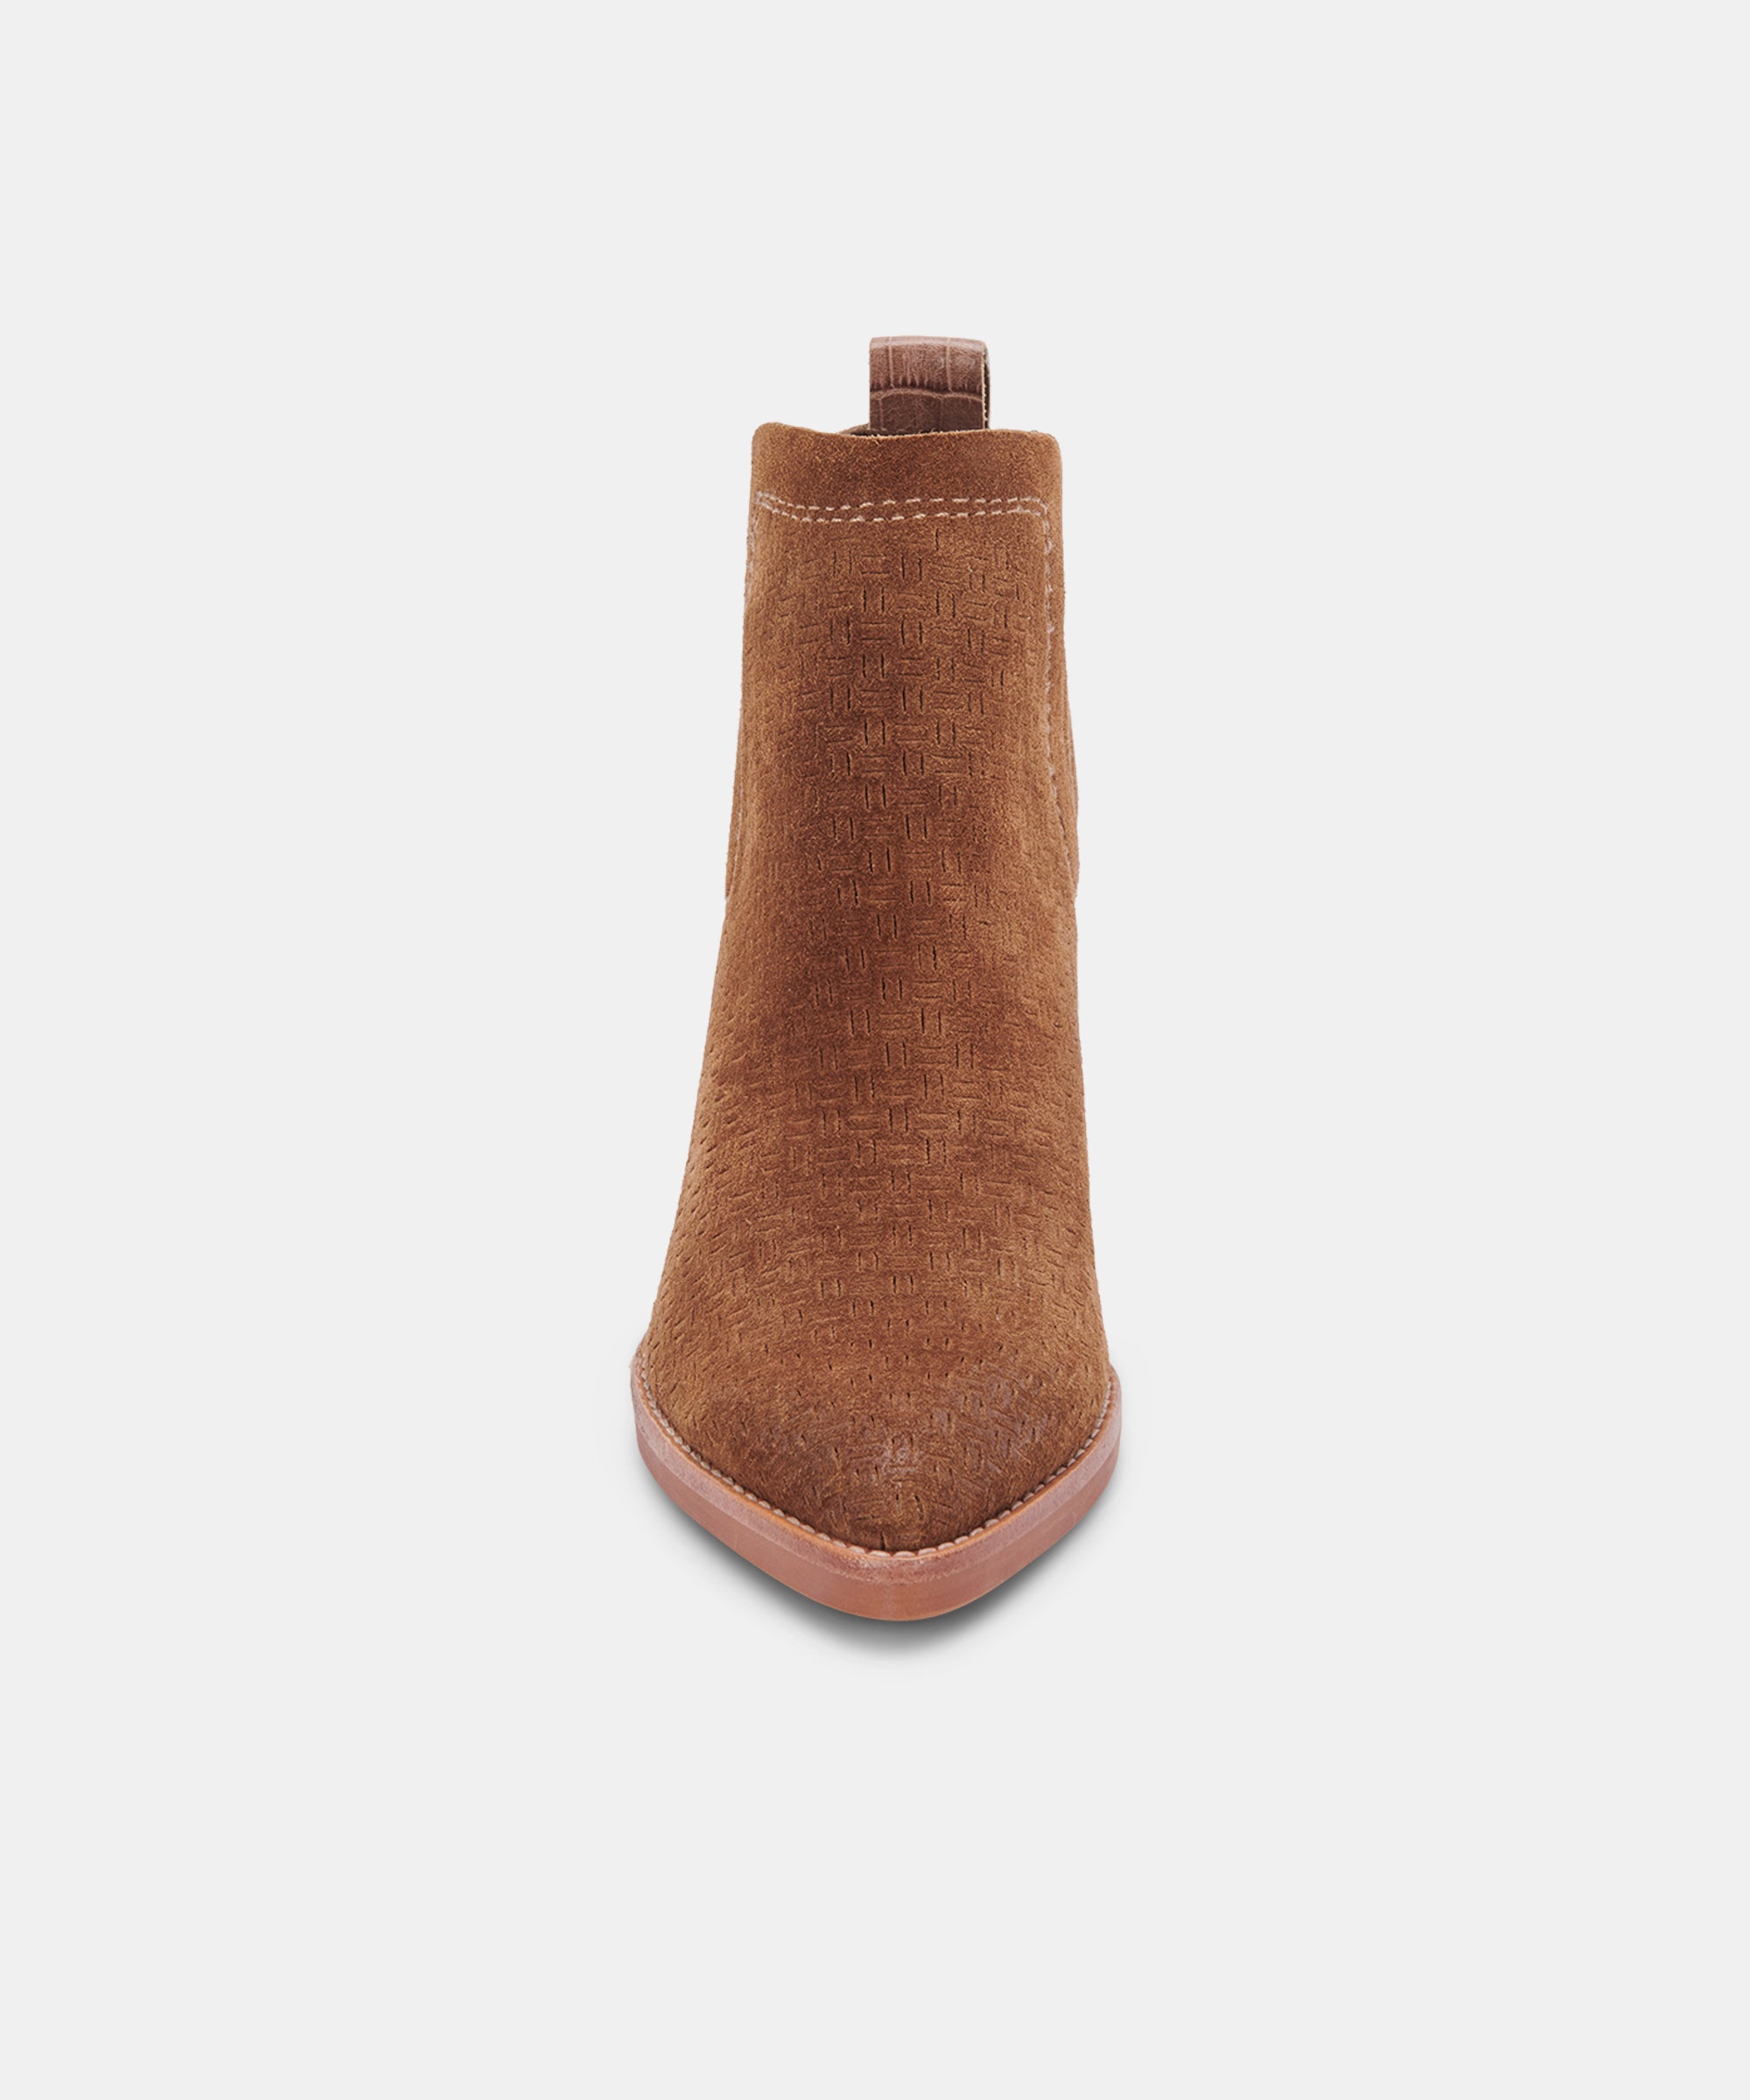 SIRANO BOOTIES DK BROWN SUEDE – Dolce Vita